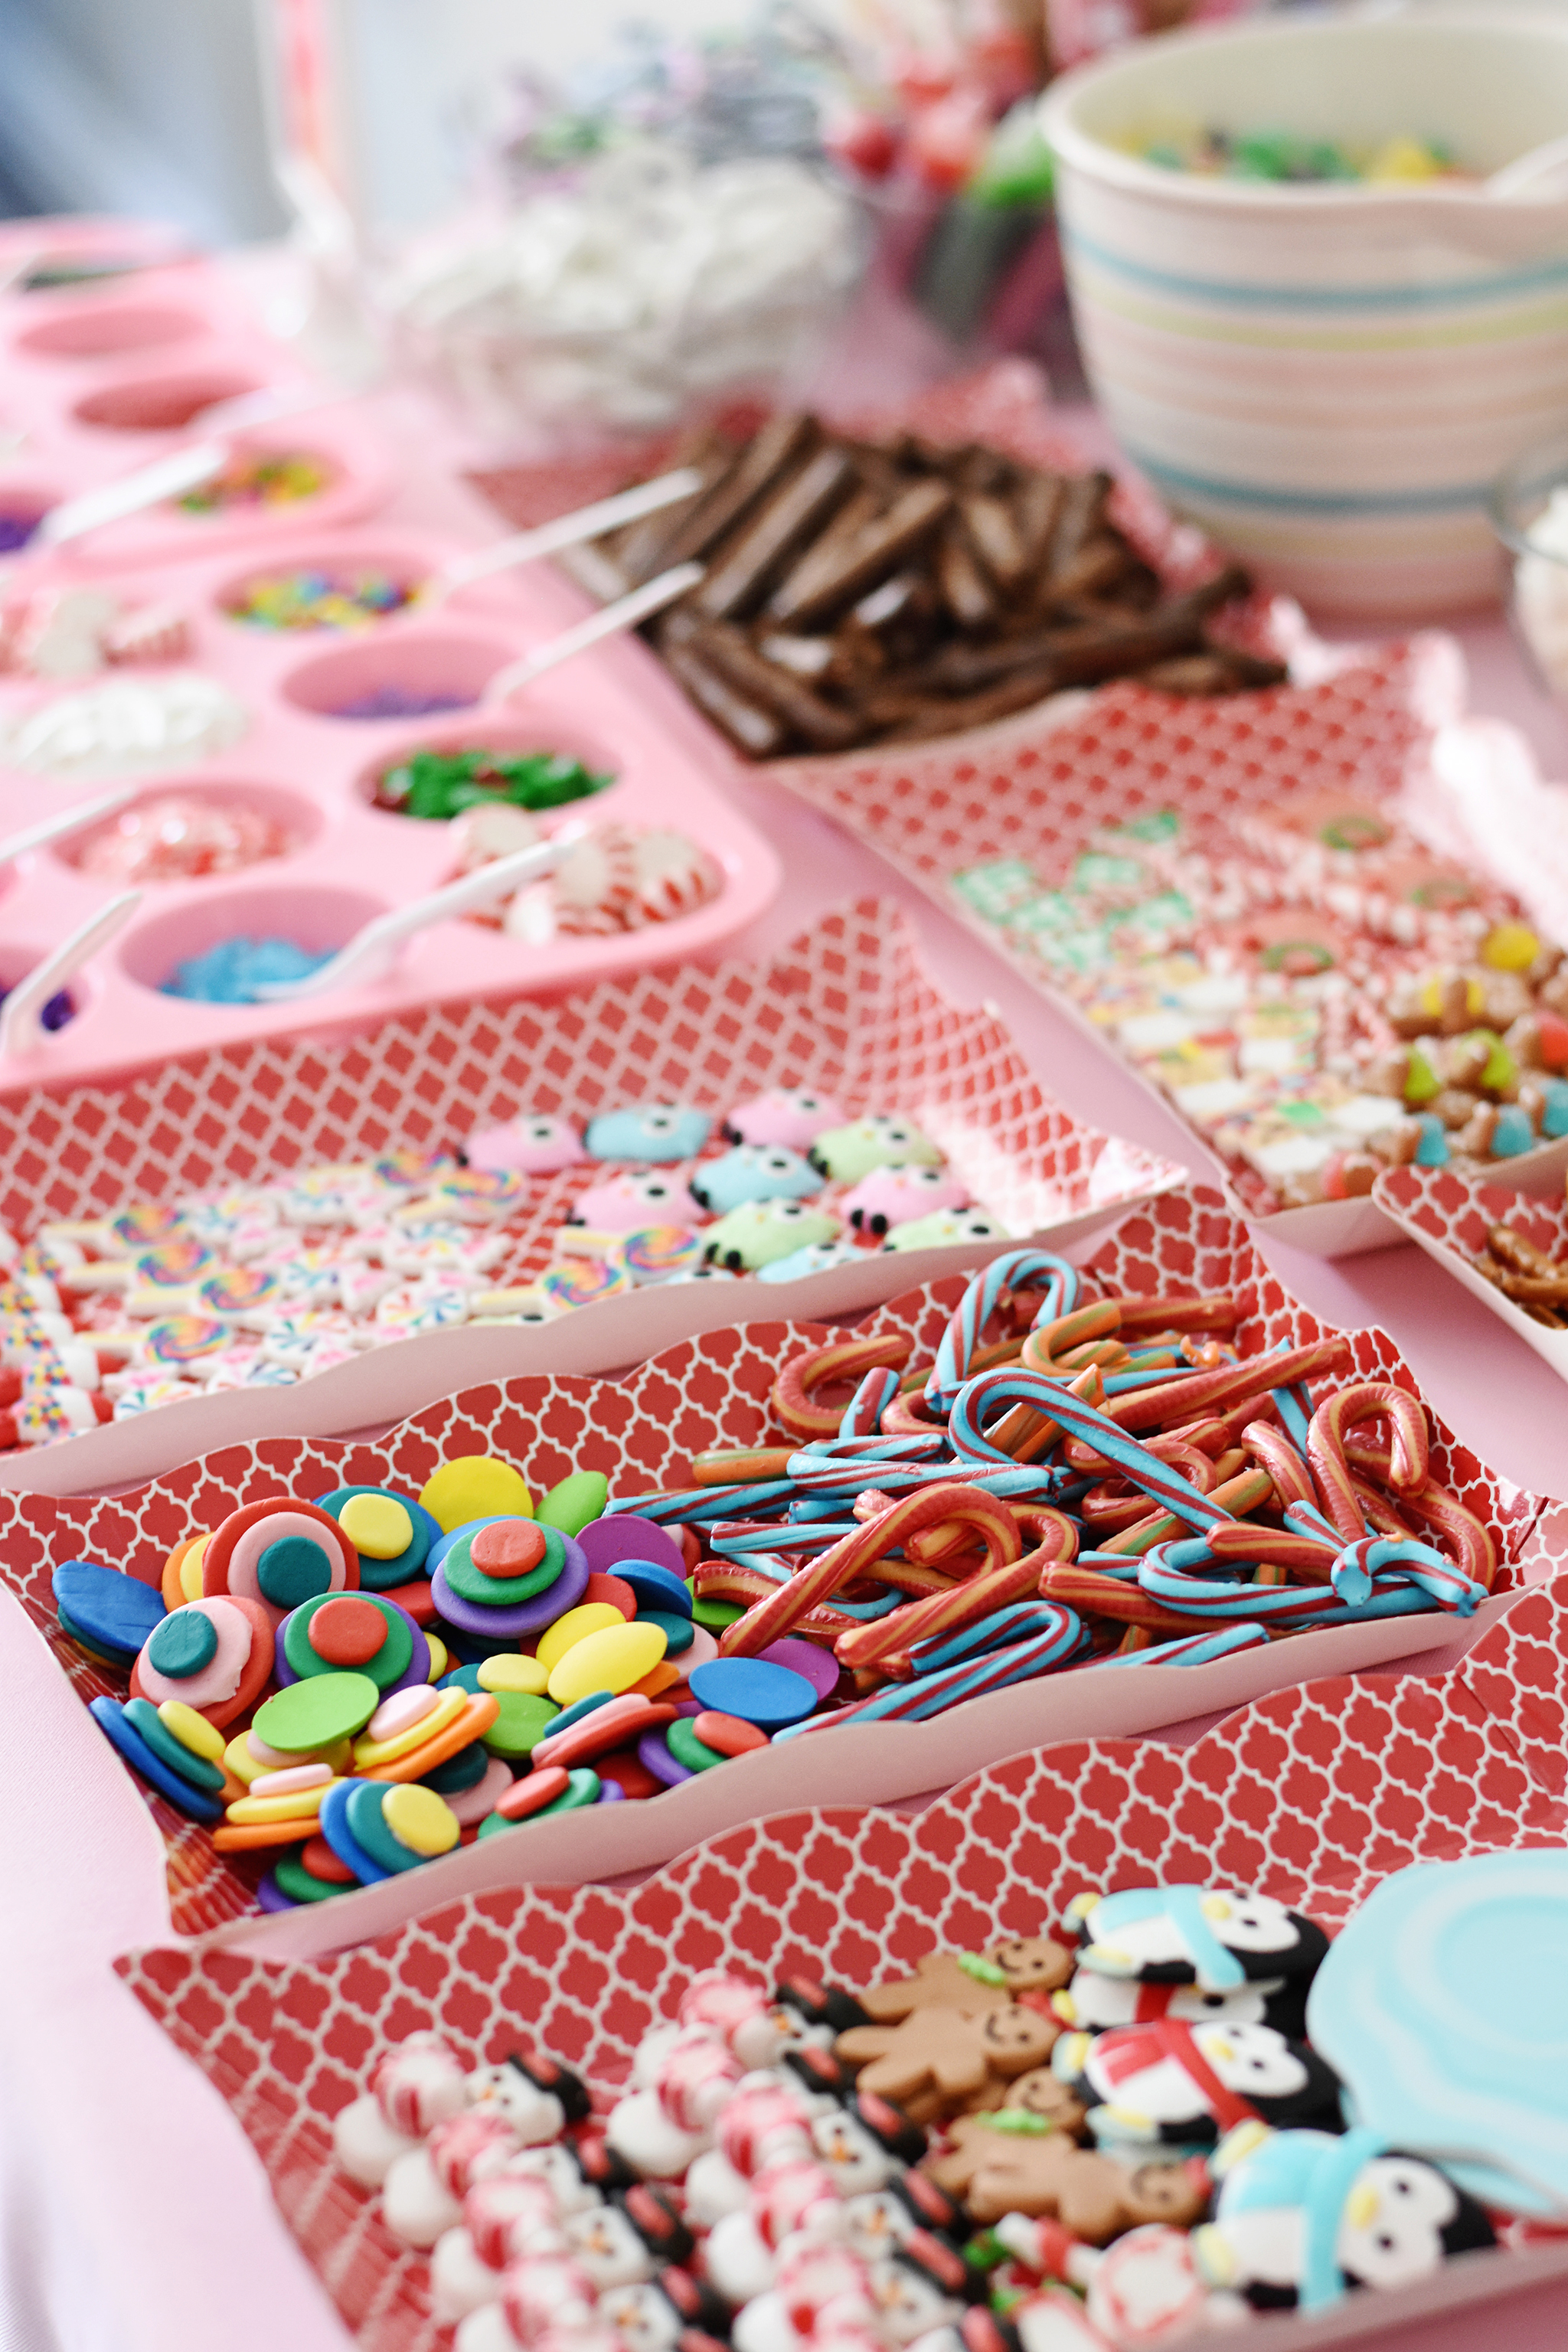 Having a wide variety of toppings makes the party extra sweet!